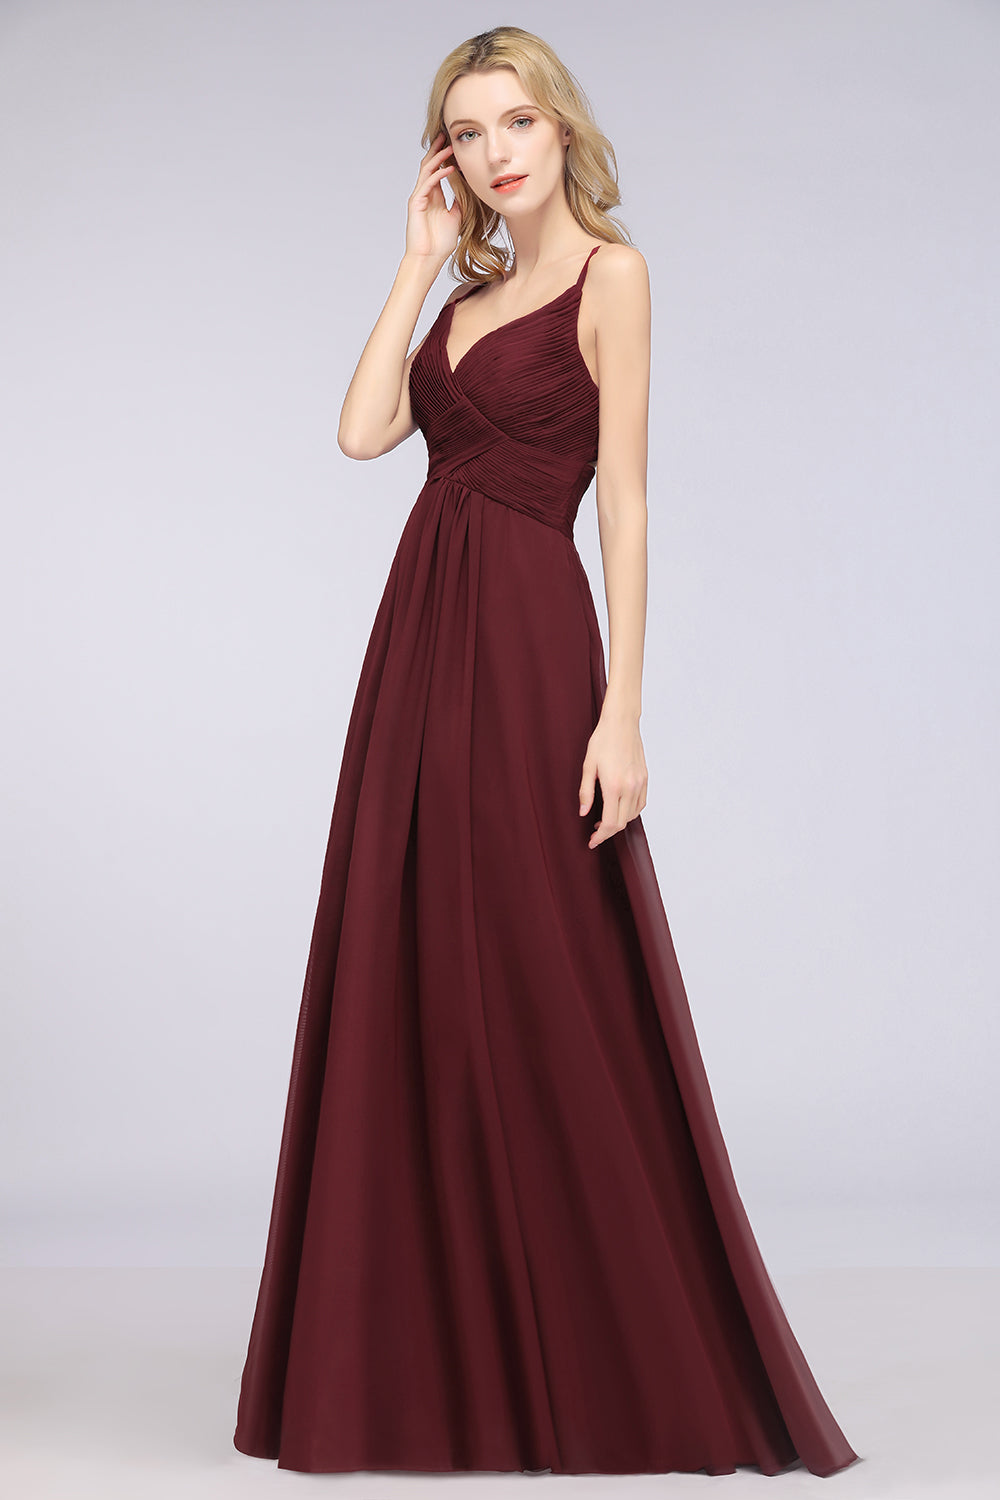 Load image into Gallery viewer, Affordable Chiffon Ruffle V-Neck Bridesmaid Dress with Spaghetti Straps-27dress
